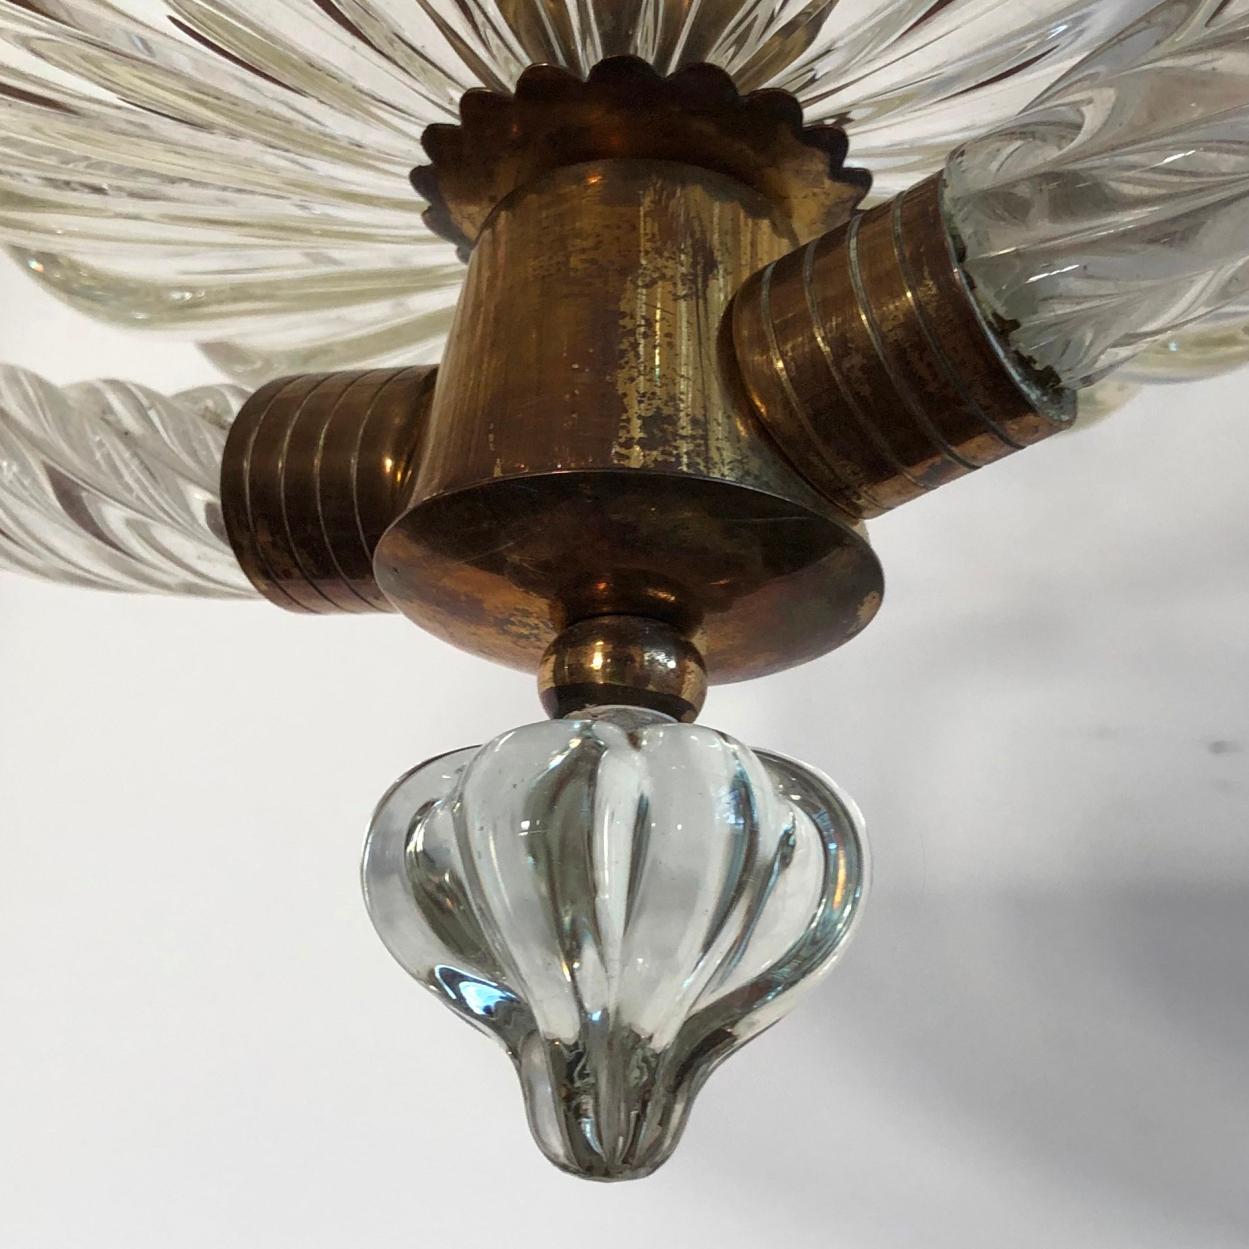 Ercole Barovier Murano Chandelier, Italy, 1940s For Sale 5